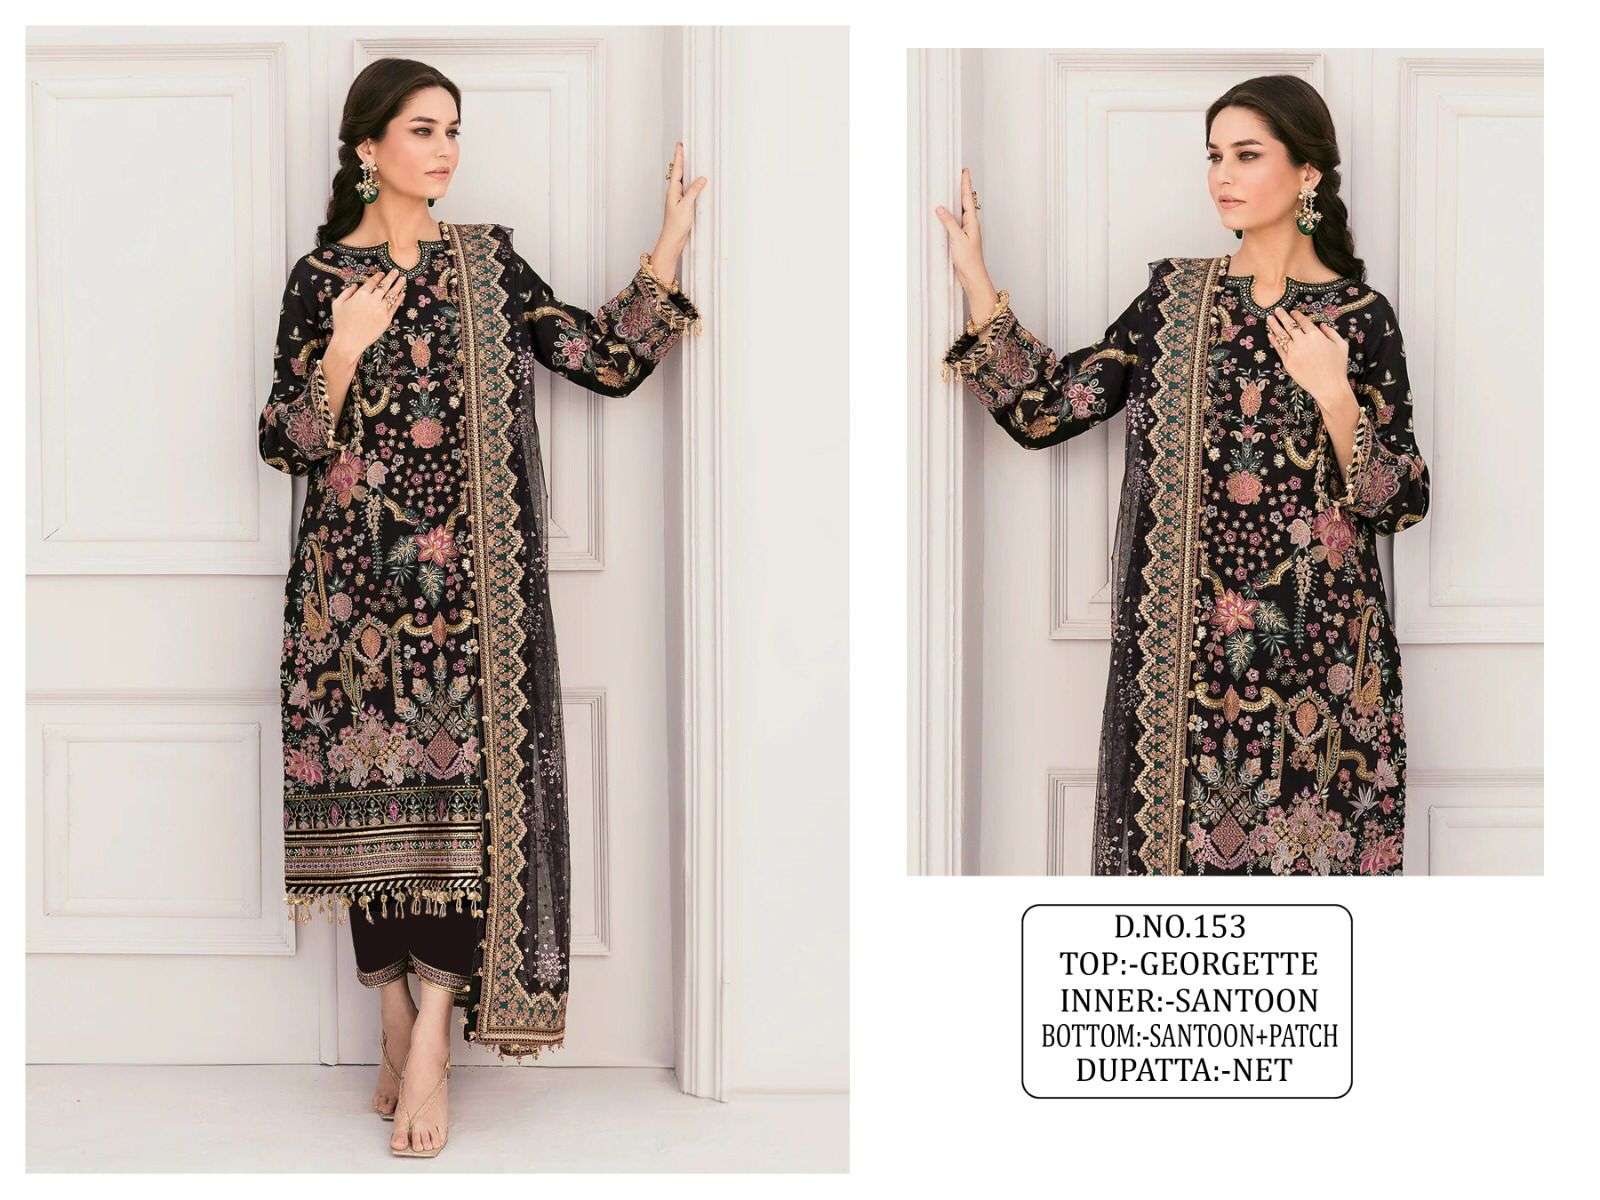 KF-153 COLORS BY ASLIWHOLESALE 153 TO 153- E SERIES DESIGNER GEORGETTE DRESSES